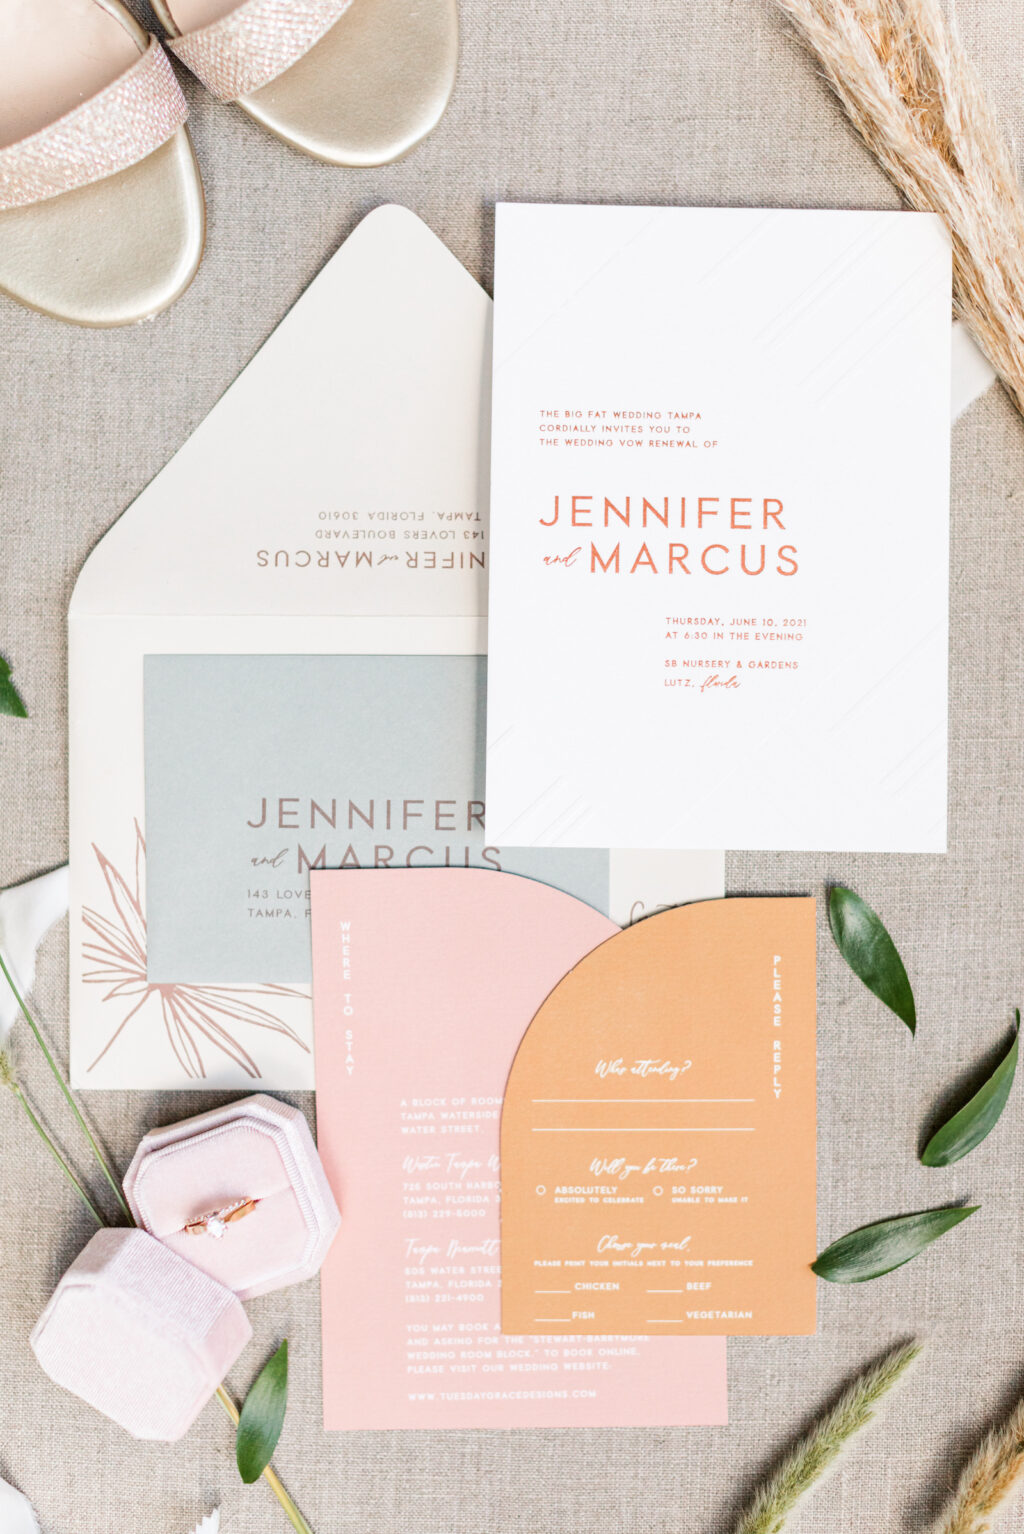 Mid-Century Modern Wedding Invitation Suite, Coral Pink, Orange Arched Stationery, Gray and White Invitation Cards | Big Fake Wedding Tampa